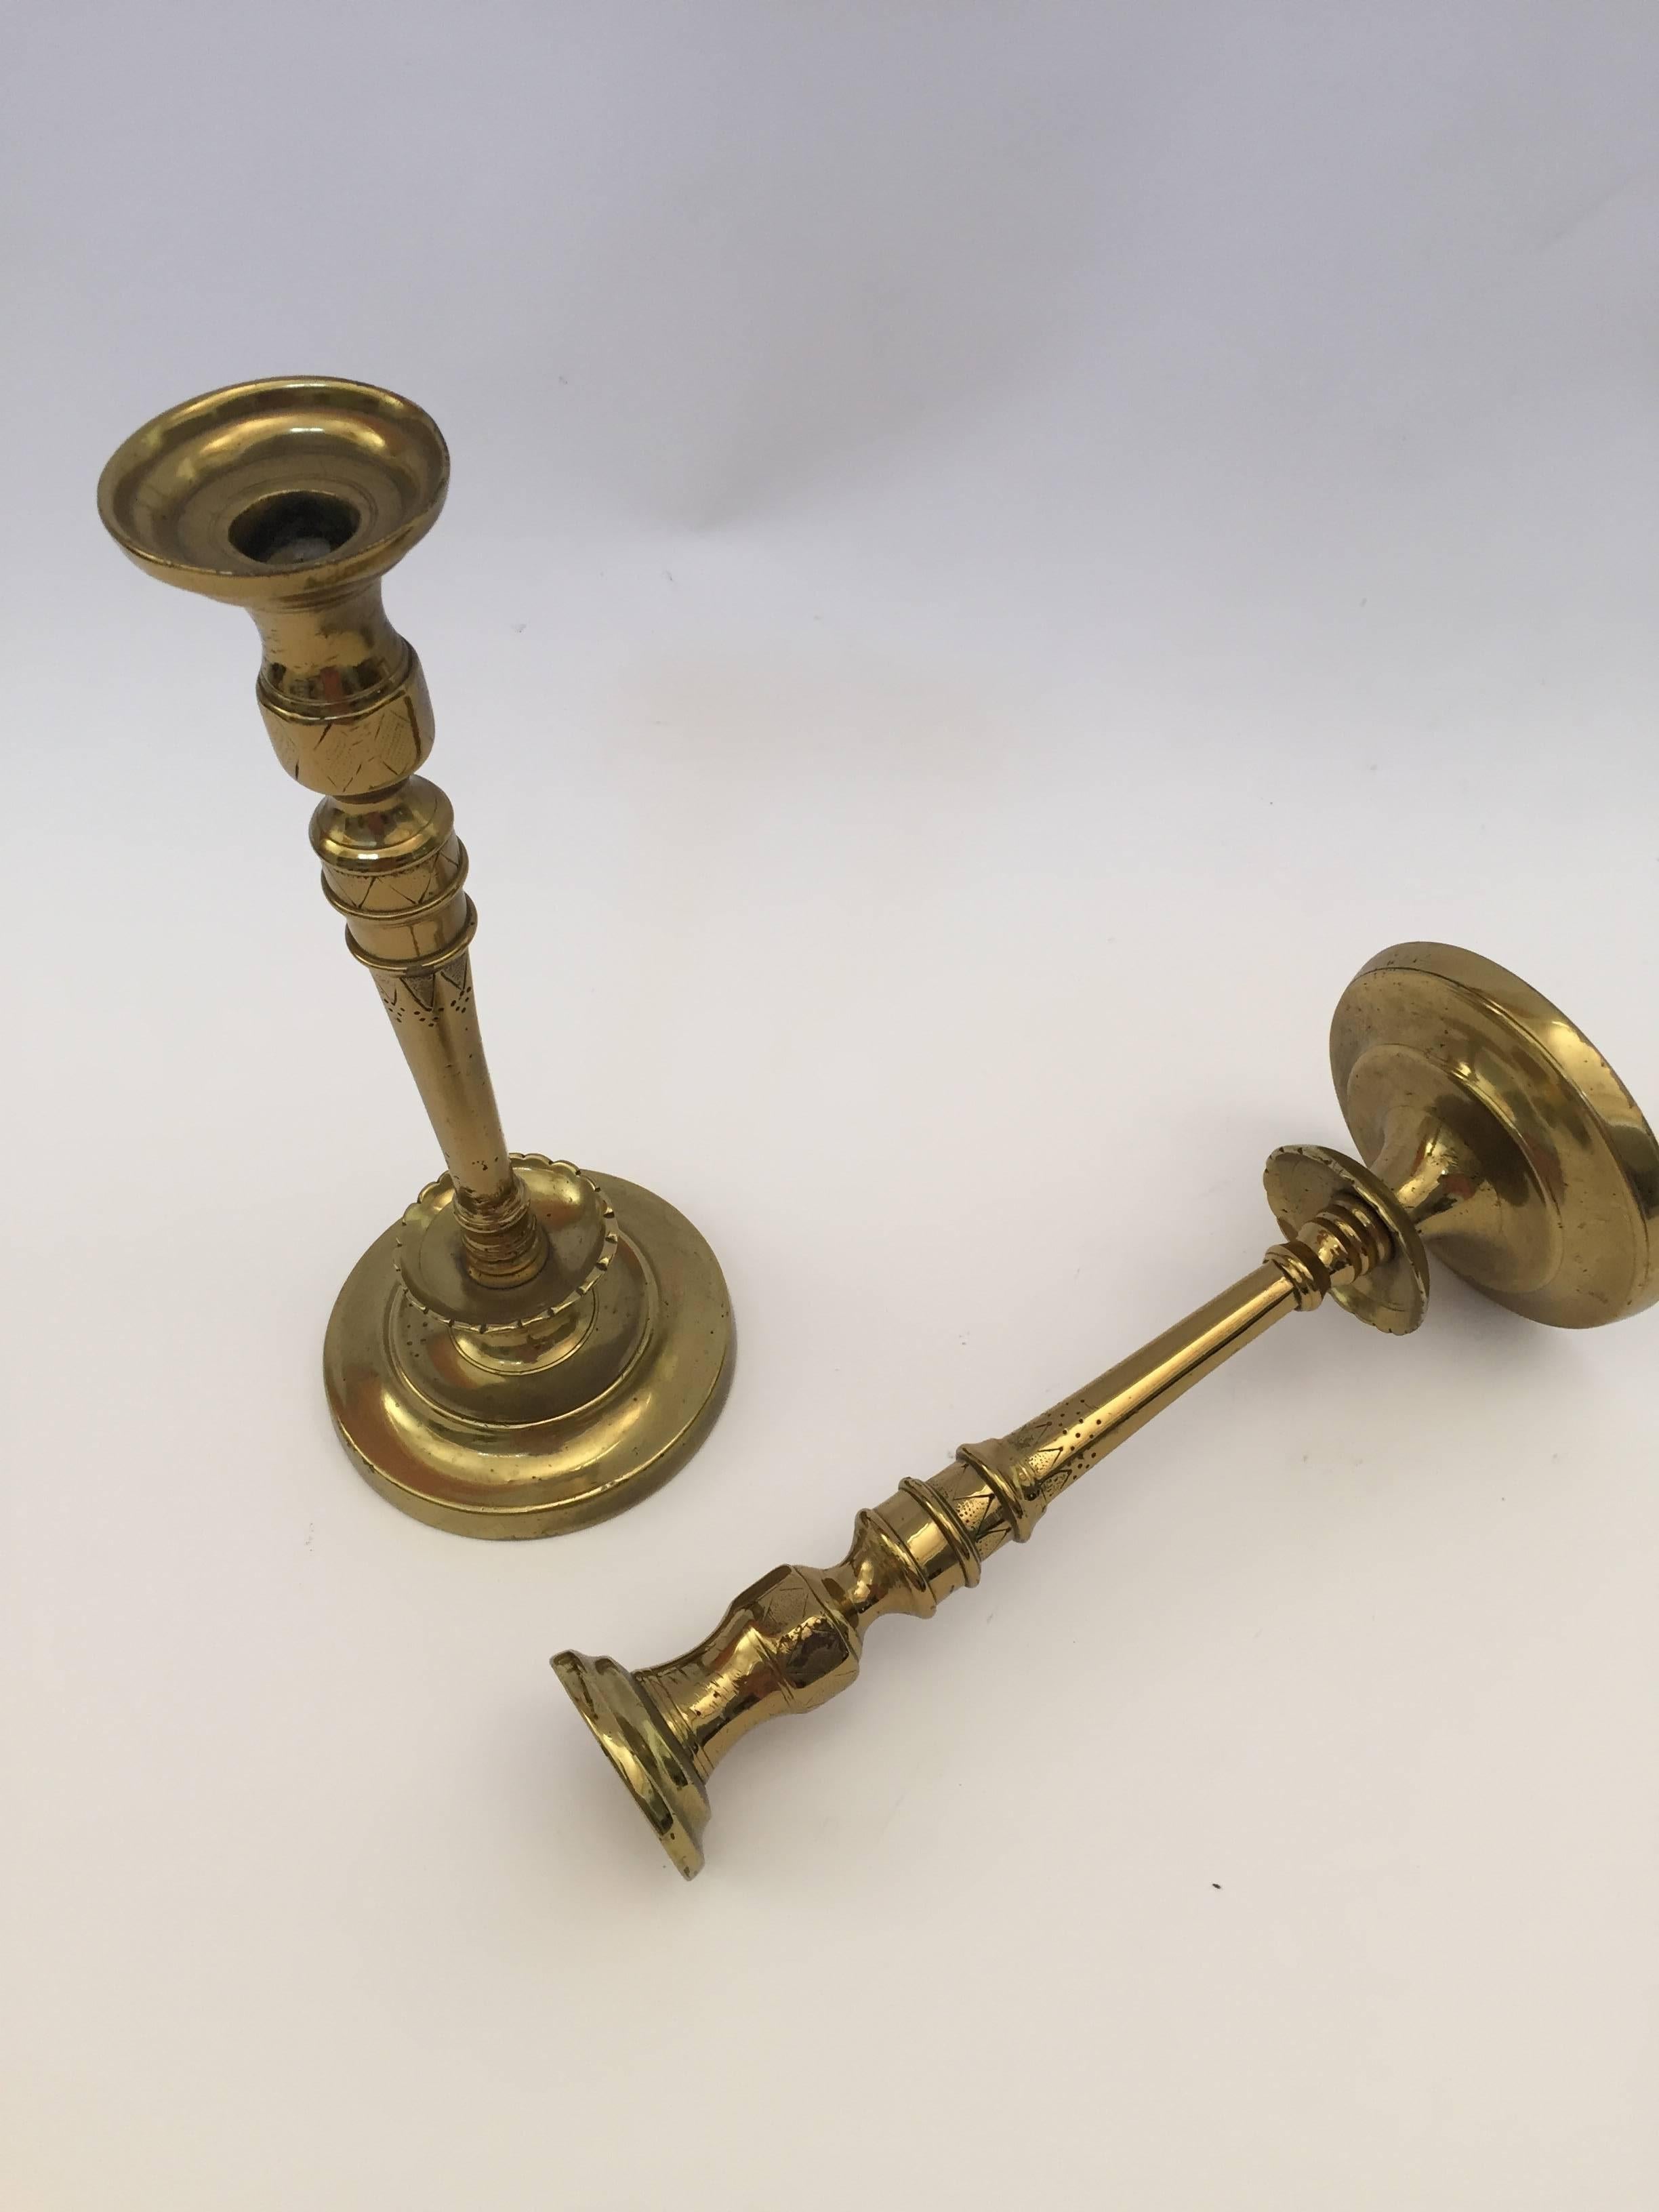 Pair of French 19th C. hand-tooled brass candlesticks.
Size: 12